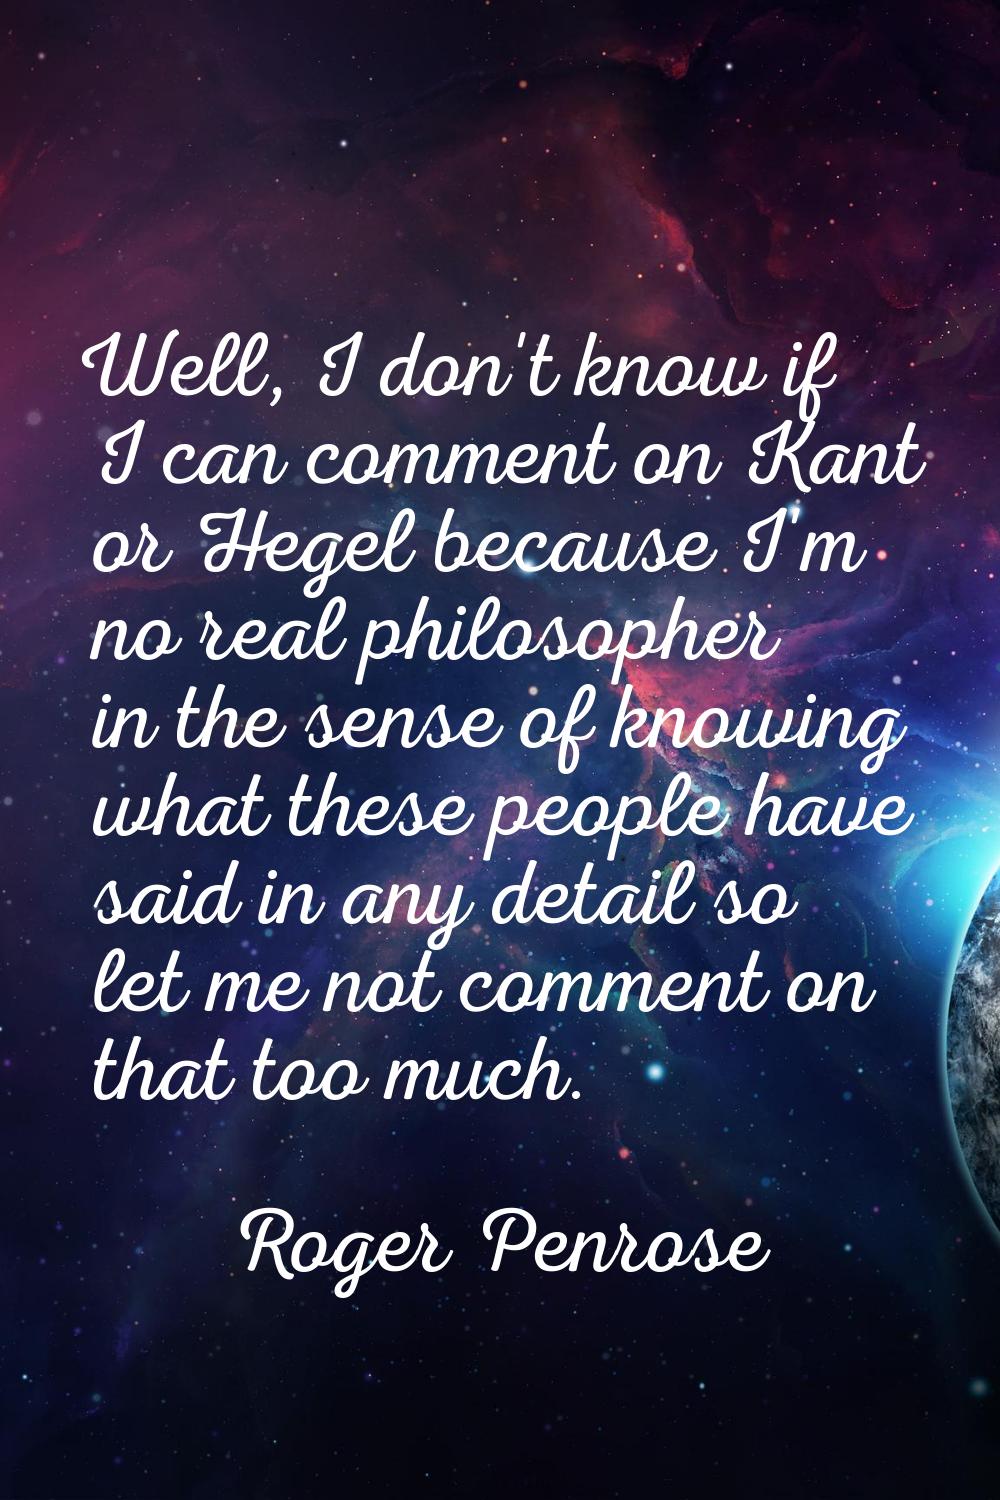 Well, I don't know if I can comment on Kant or Hegel because I'm no real philosopher in the sense o